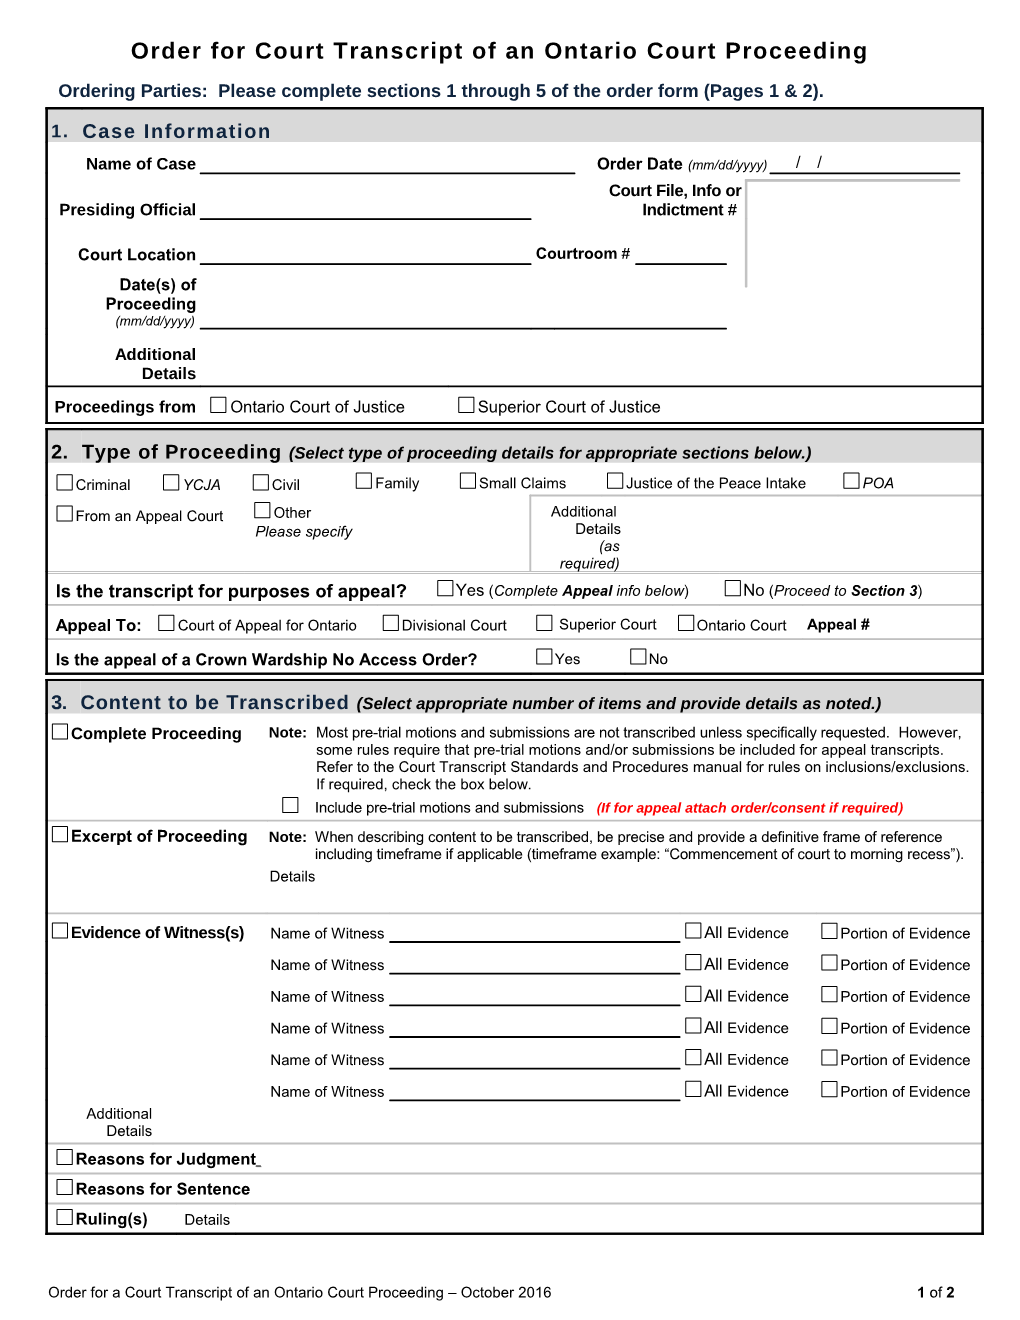 Appendix B - Request Form/Undertaking to the Court for Access to Digital Court Recordings